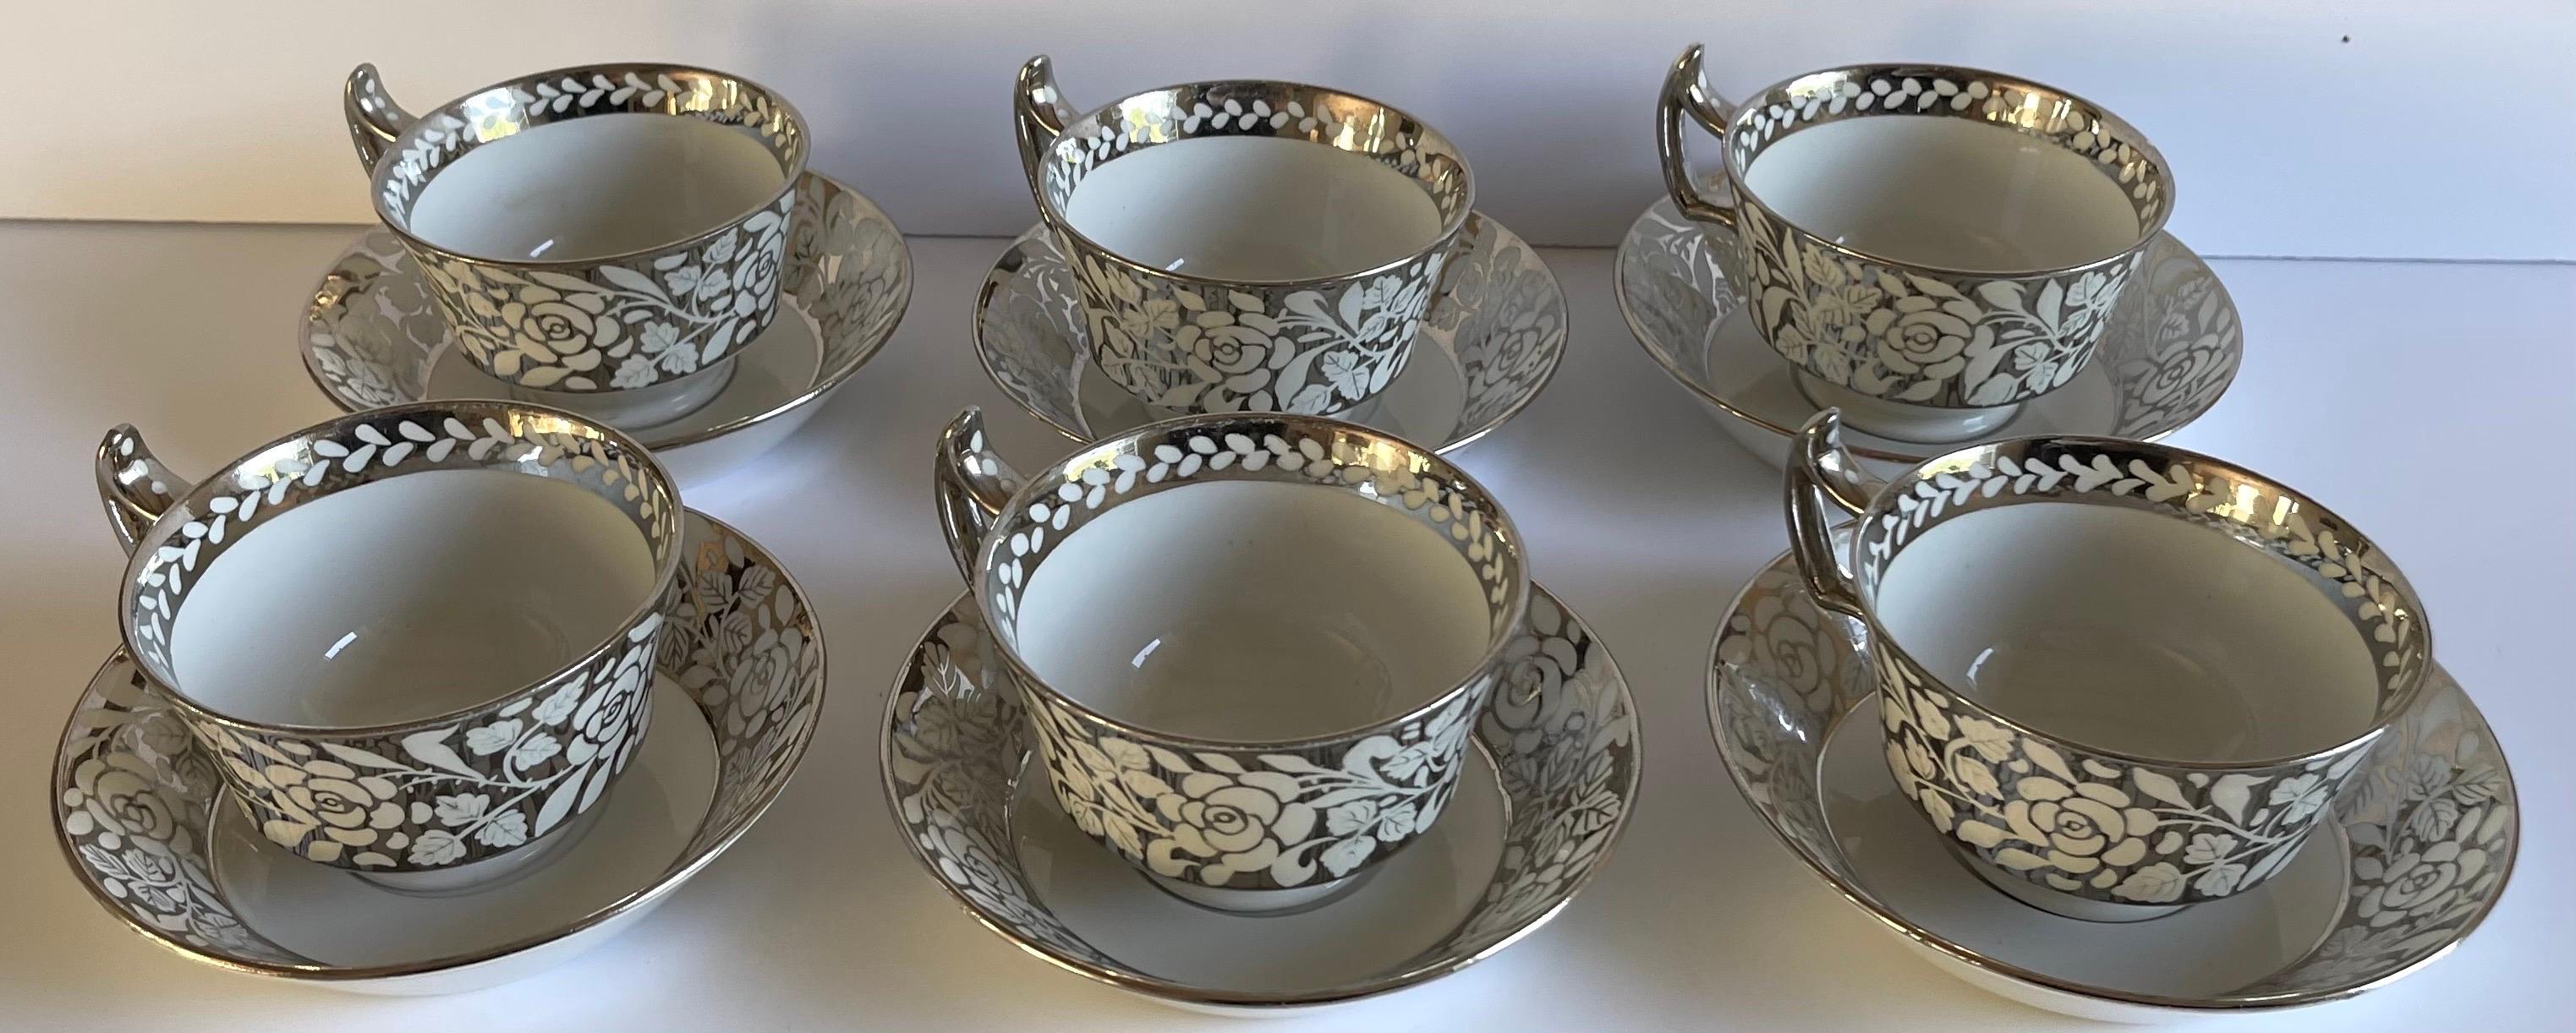 Set of six 1930s Wedgwood lusterware tea cups and saucers. Overall silver floral motif on bone China background. Set includes 6 tea cups and 6 saucers, 12 pieces total. 
Each piece is stamped Wedgwood on the underside. 
Each teacup measures: 4” wide